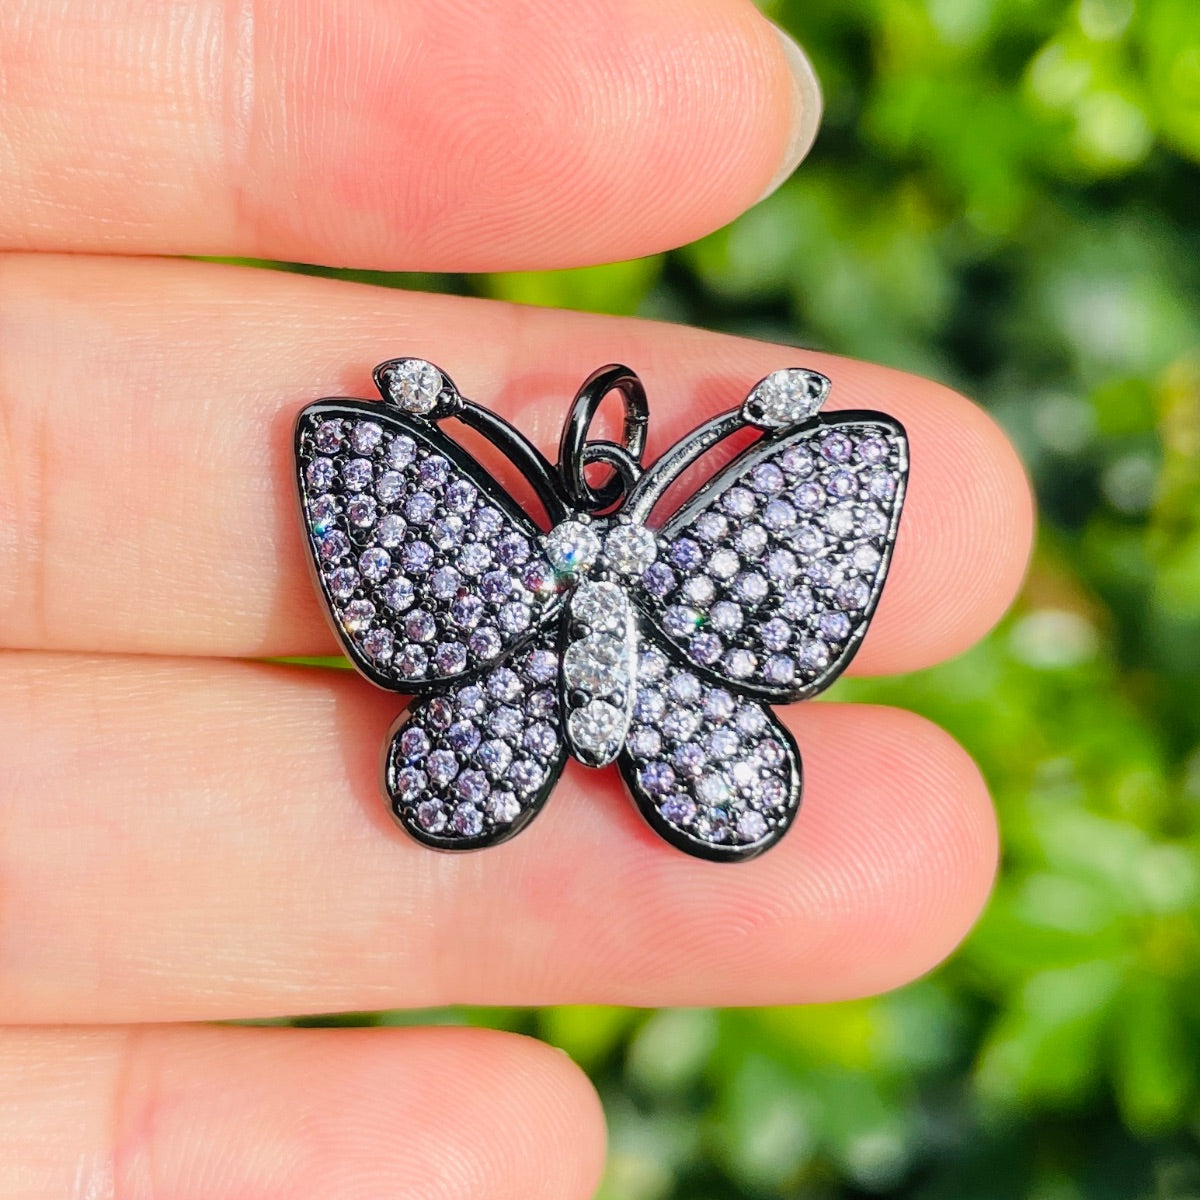 5pcs/lot 25*20mm Multicolor CZ Paved Butterfly Charms Purple on Black CZ Paved Charms Butterflies Colorful Zirconia New Charms Arrivals Charms Beads Beyond